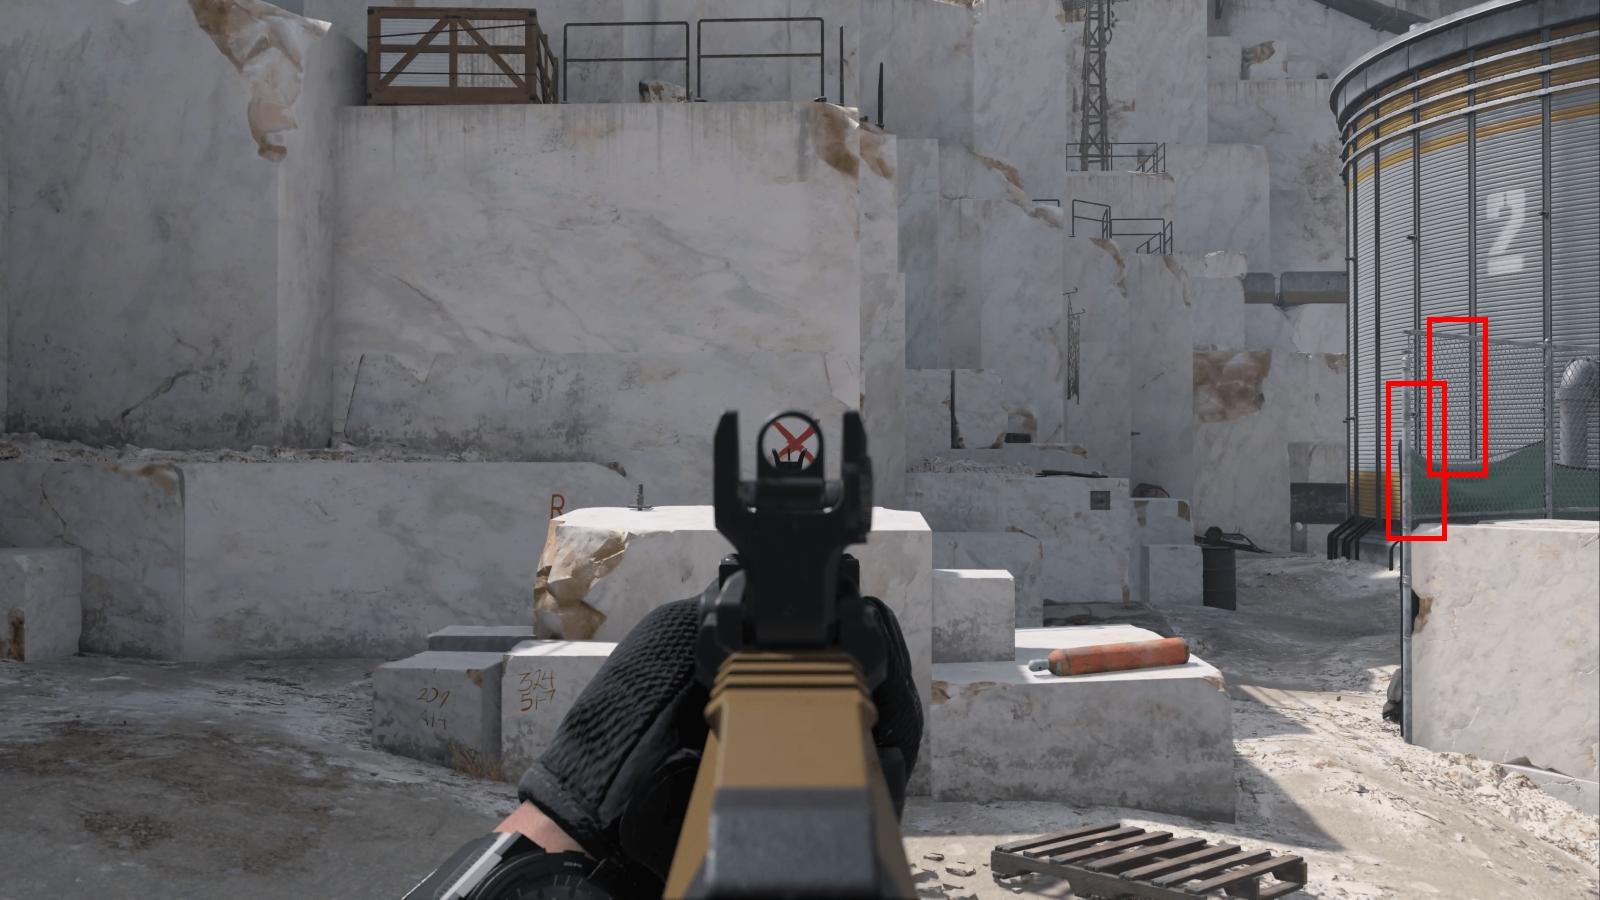 modern warfare 3 gun aiming down sights on quarry with red boxes